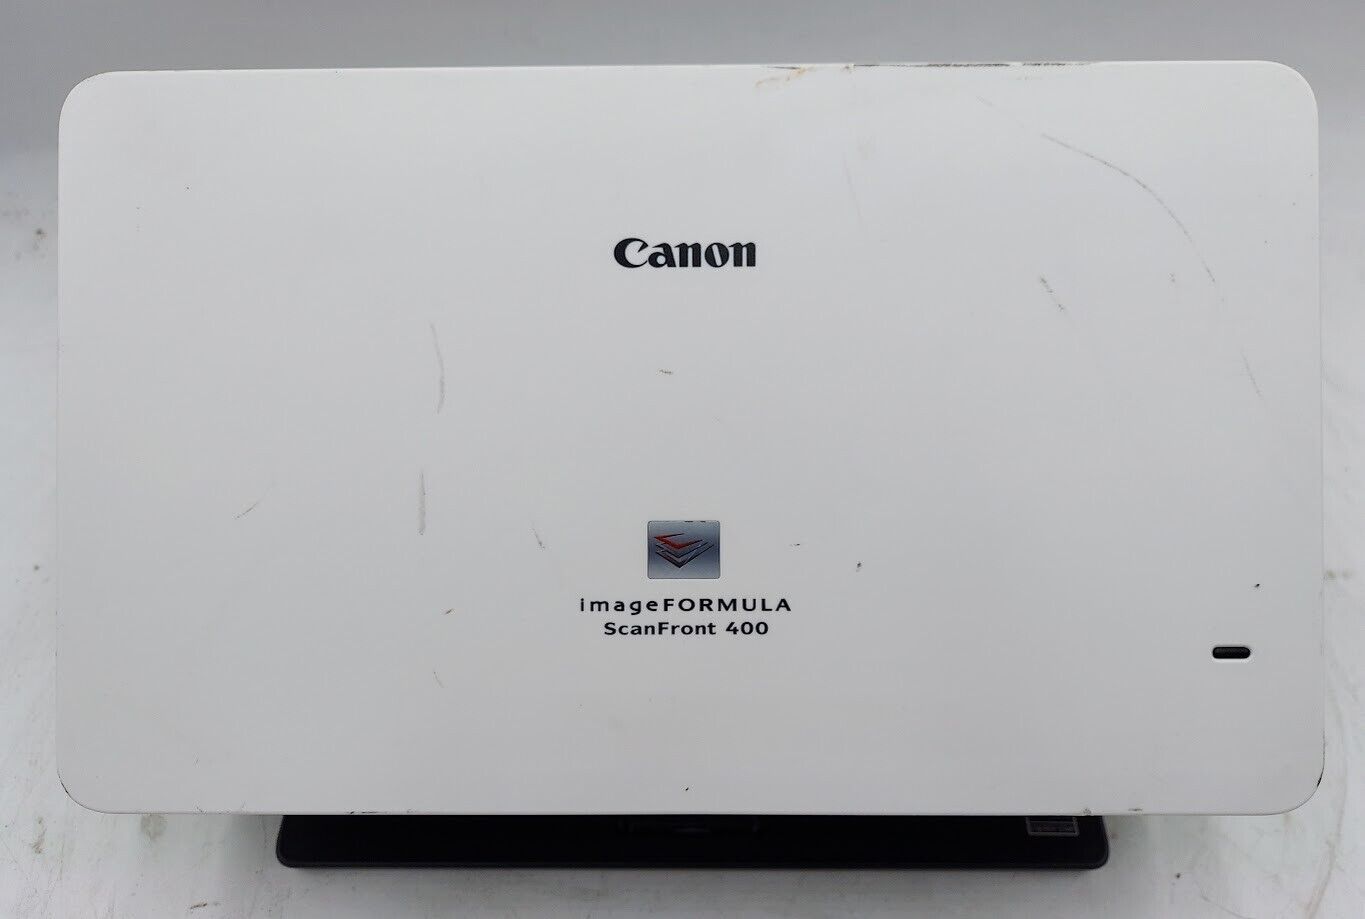 Canon imageFORMULA ScanFront 400 Networked Document Scanner M111271